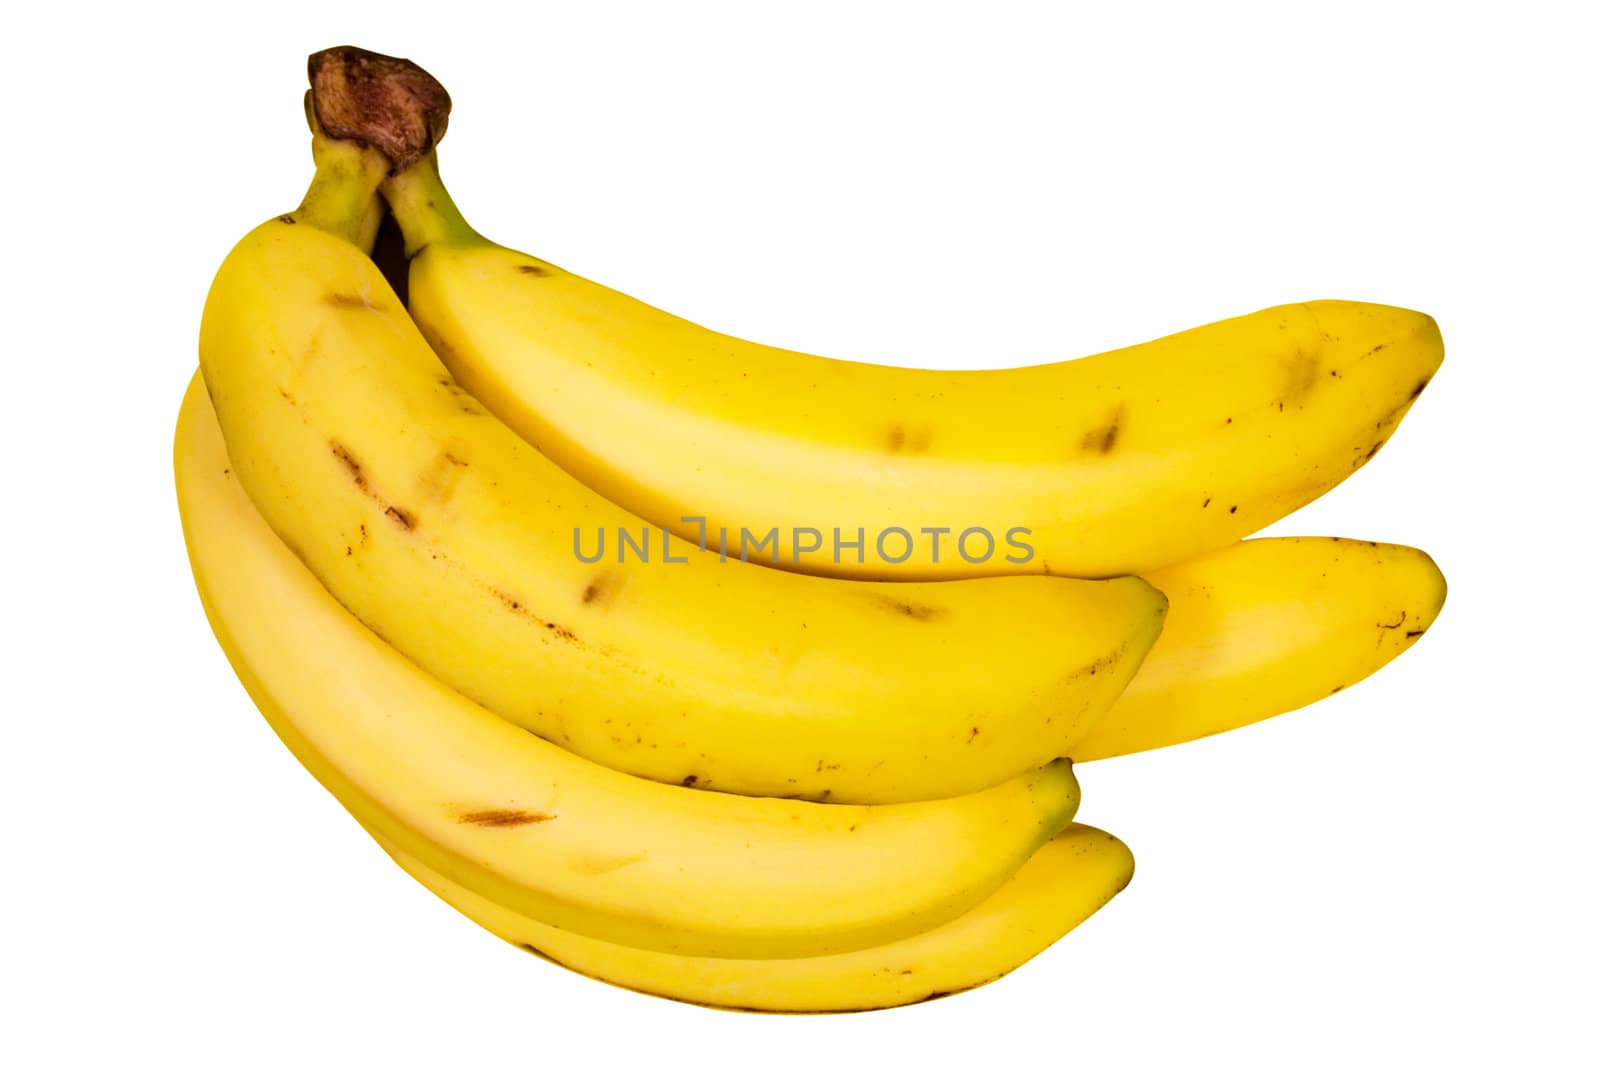 Bunch of bananas isolated on a white background. File contains clipping path.